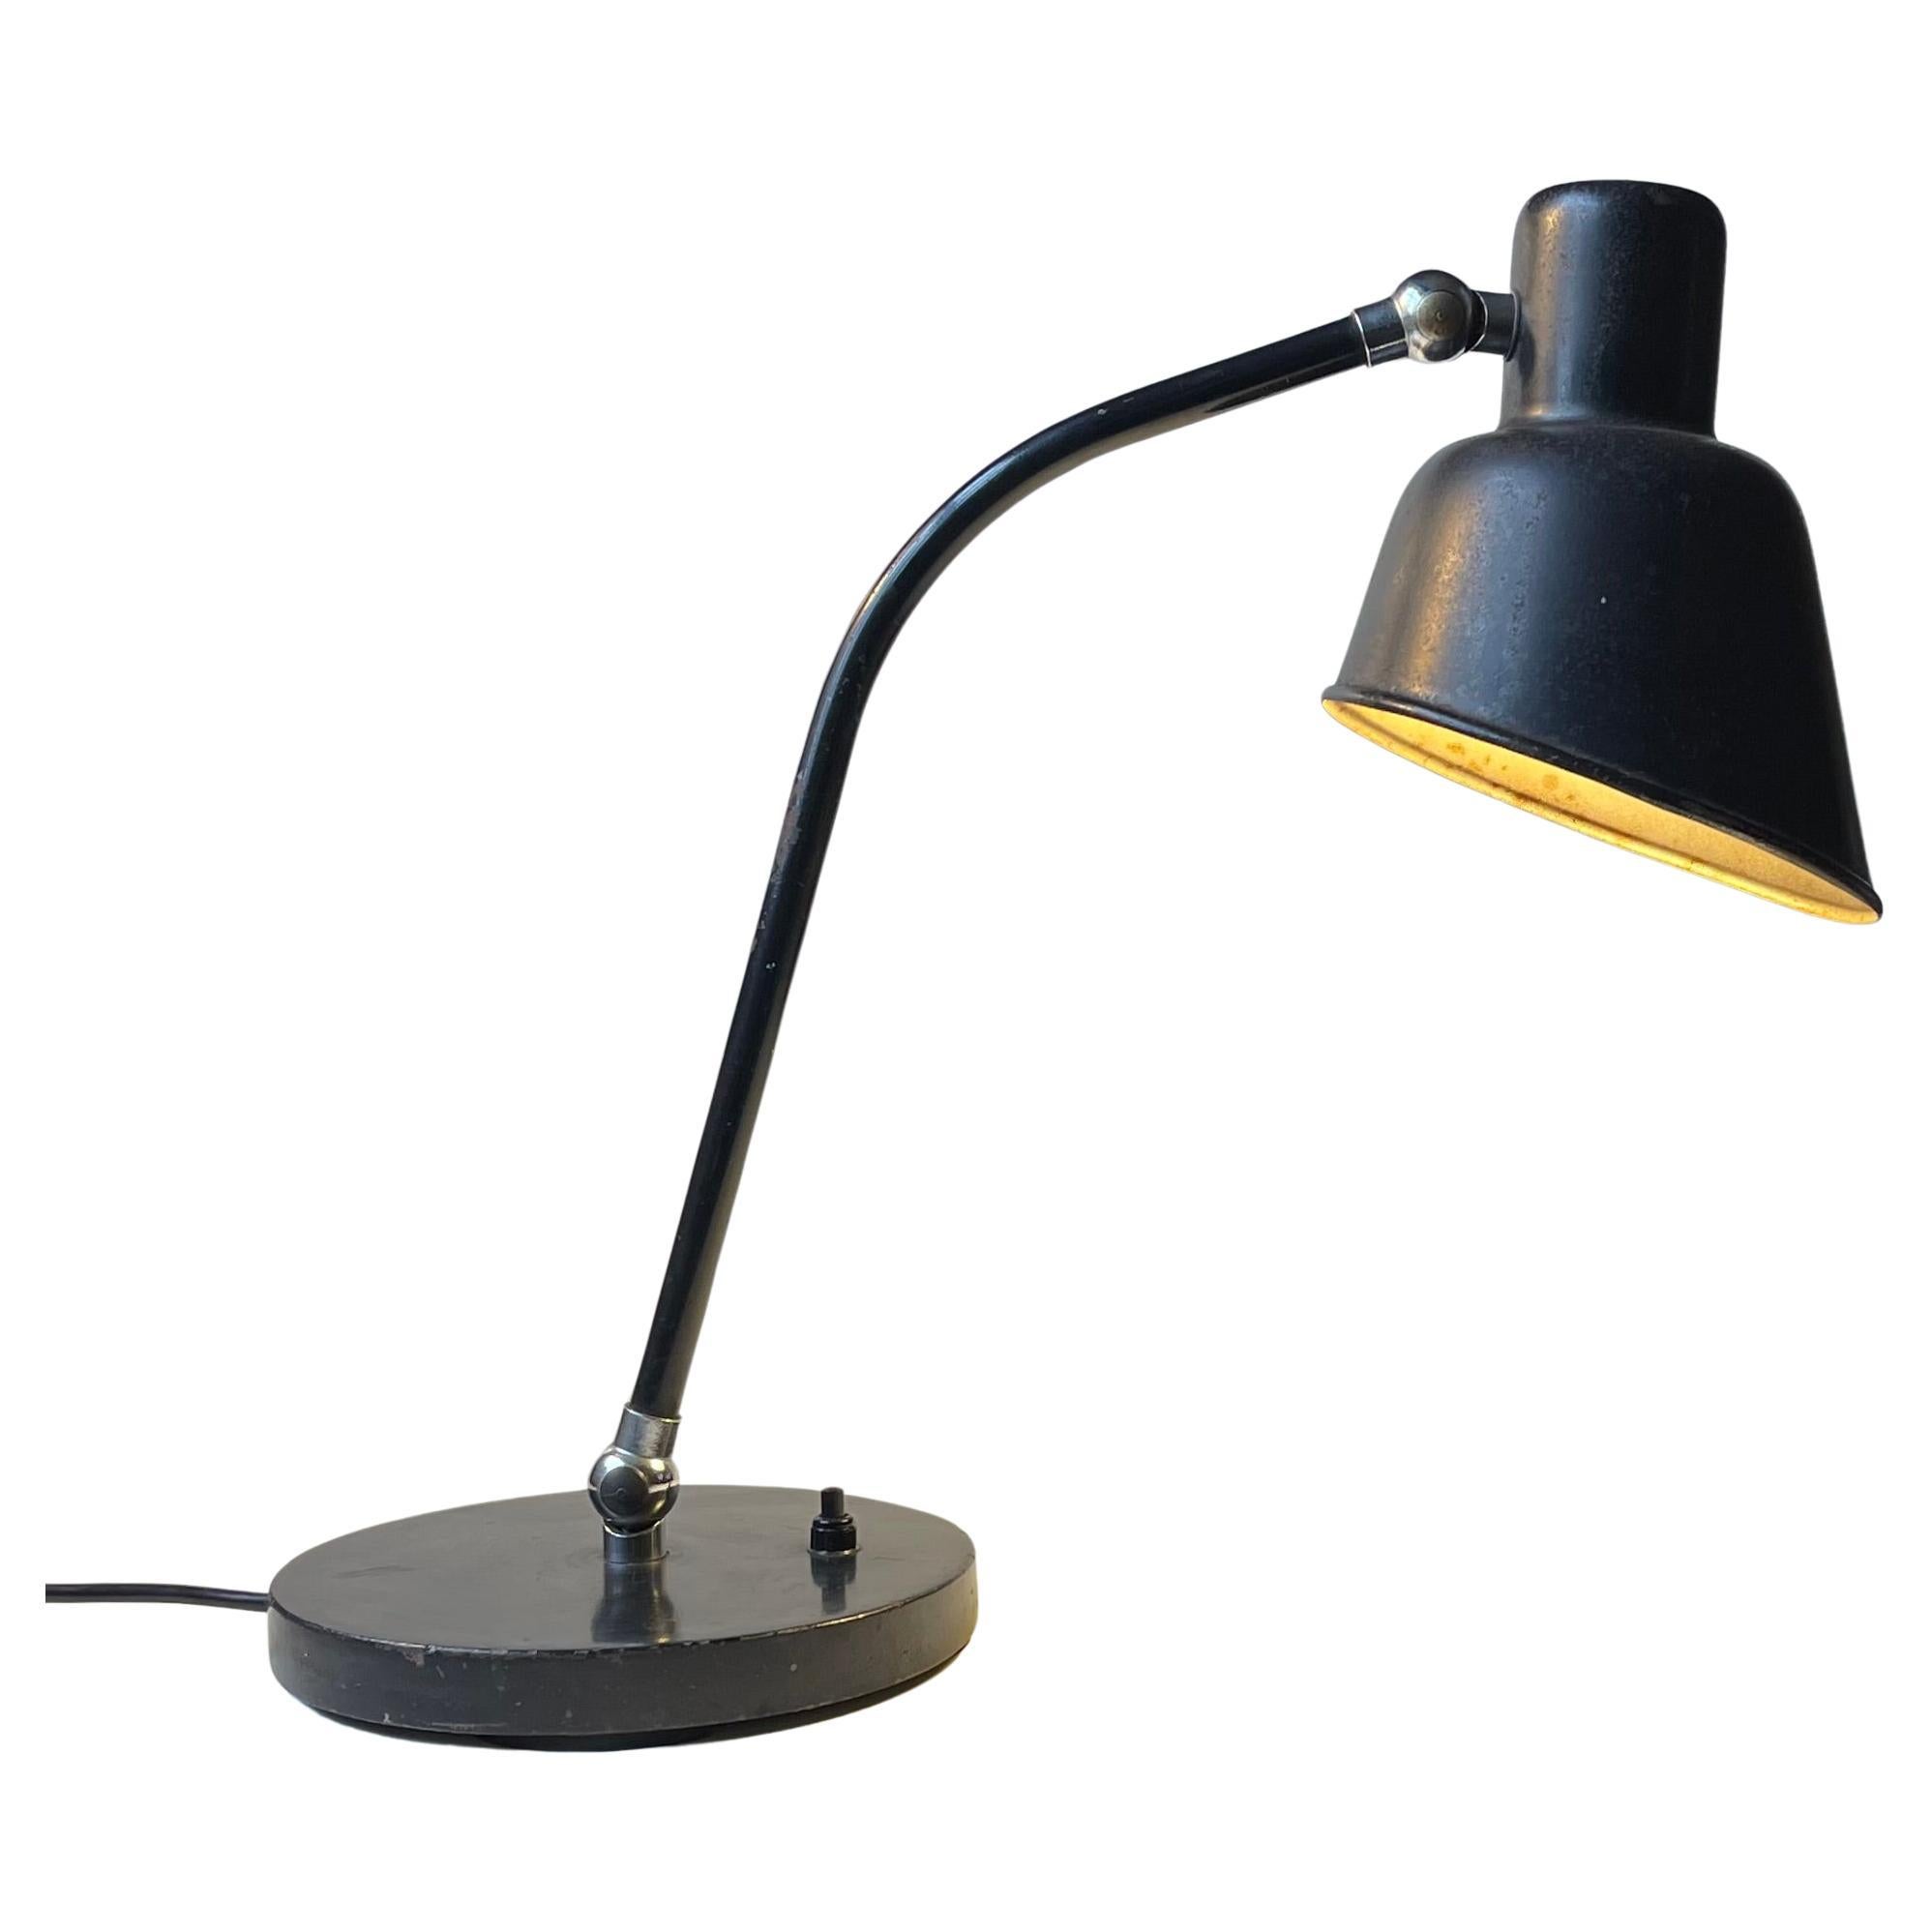 A rare version/configuration of the Matador Desk Lamp. Model 2700A designed by iconic Bauhaus designer and teacher Christian Dell. It is adjustable by the shade and at the base. Its unrestored and retains its original lacquer and 90 years worth of